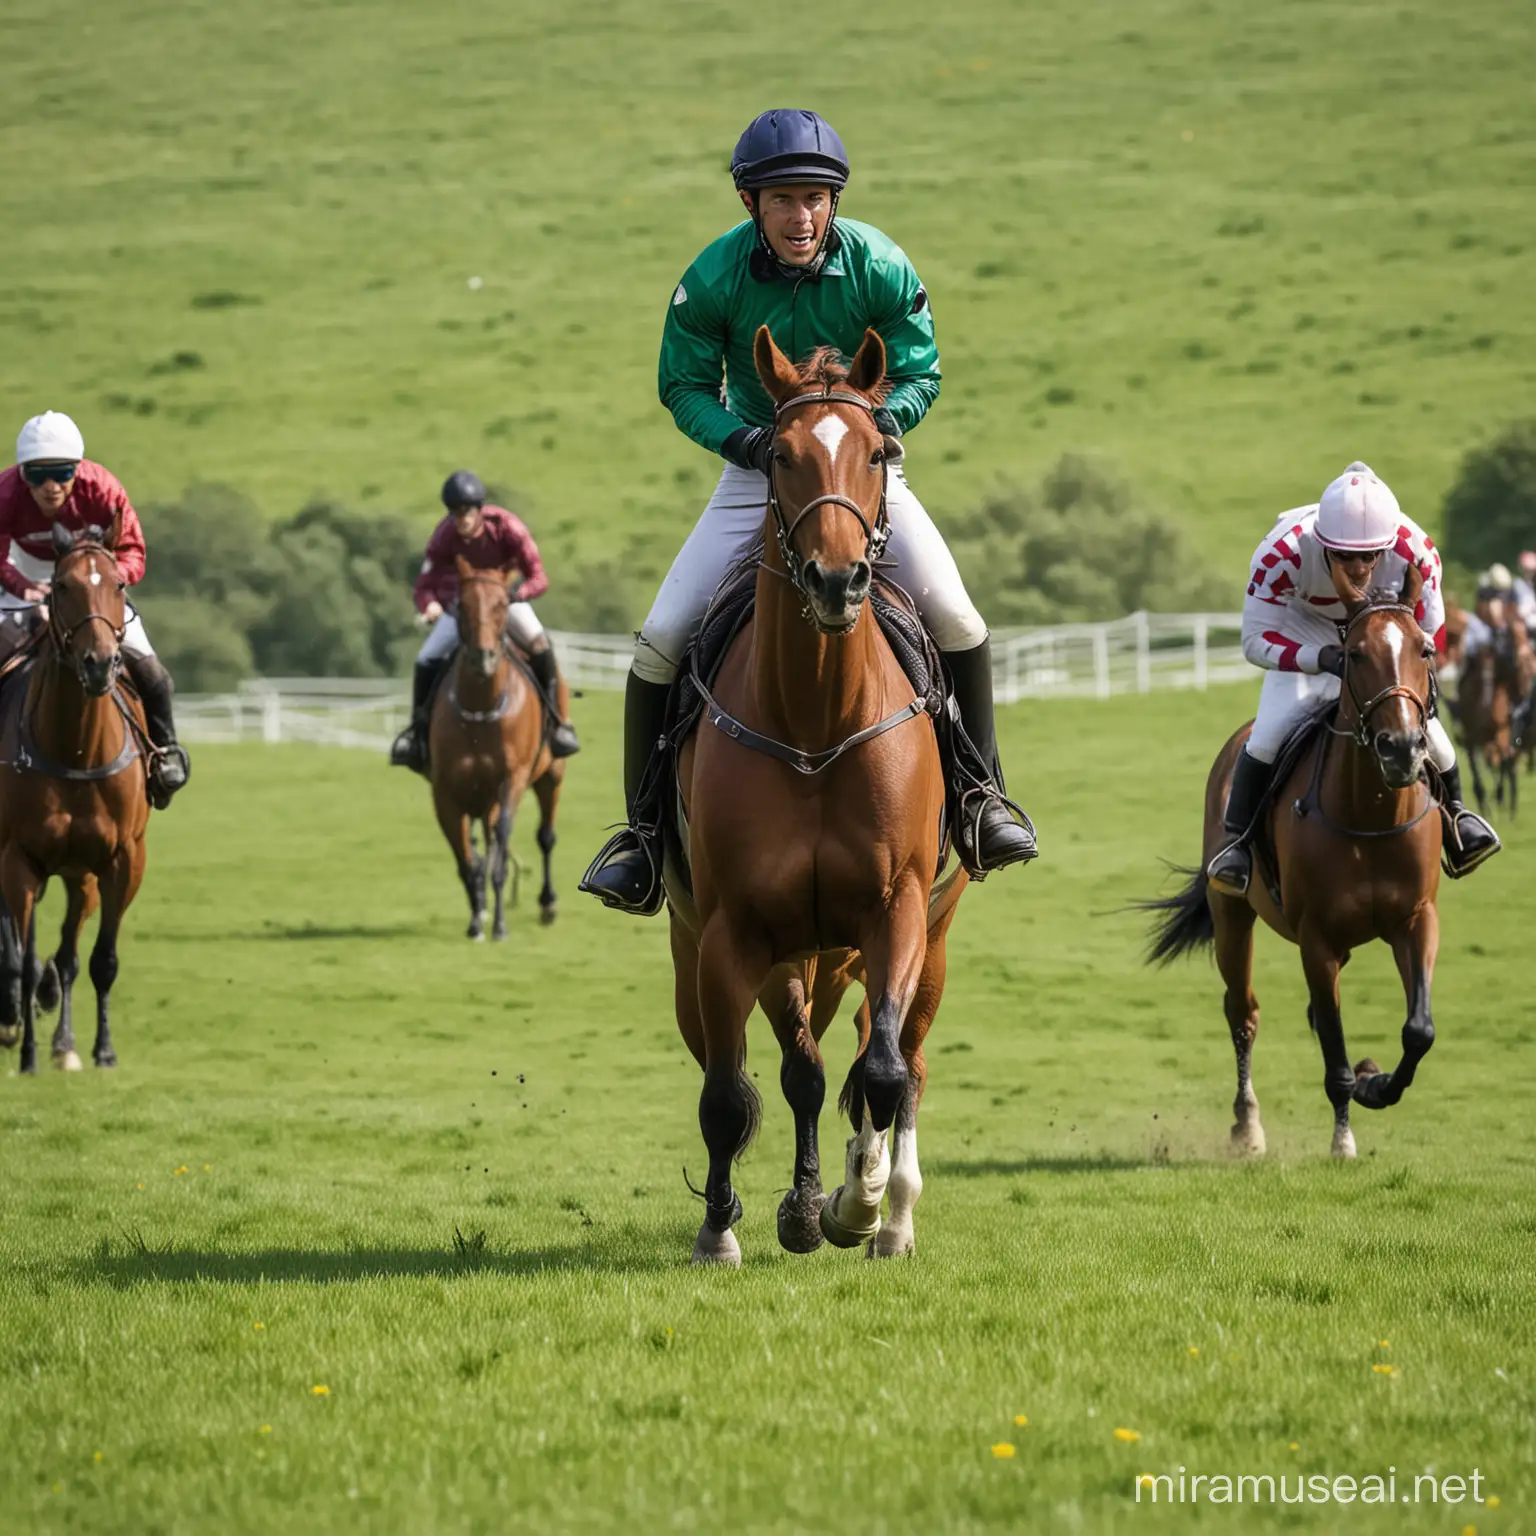 Equestrian Rider Leading the Pack in Thrilling Race Across Lush Green Pasture